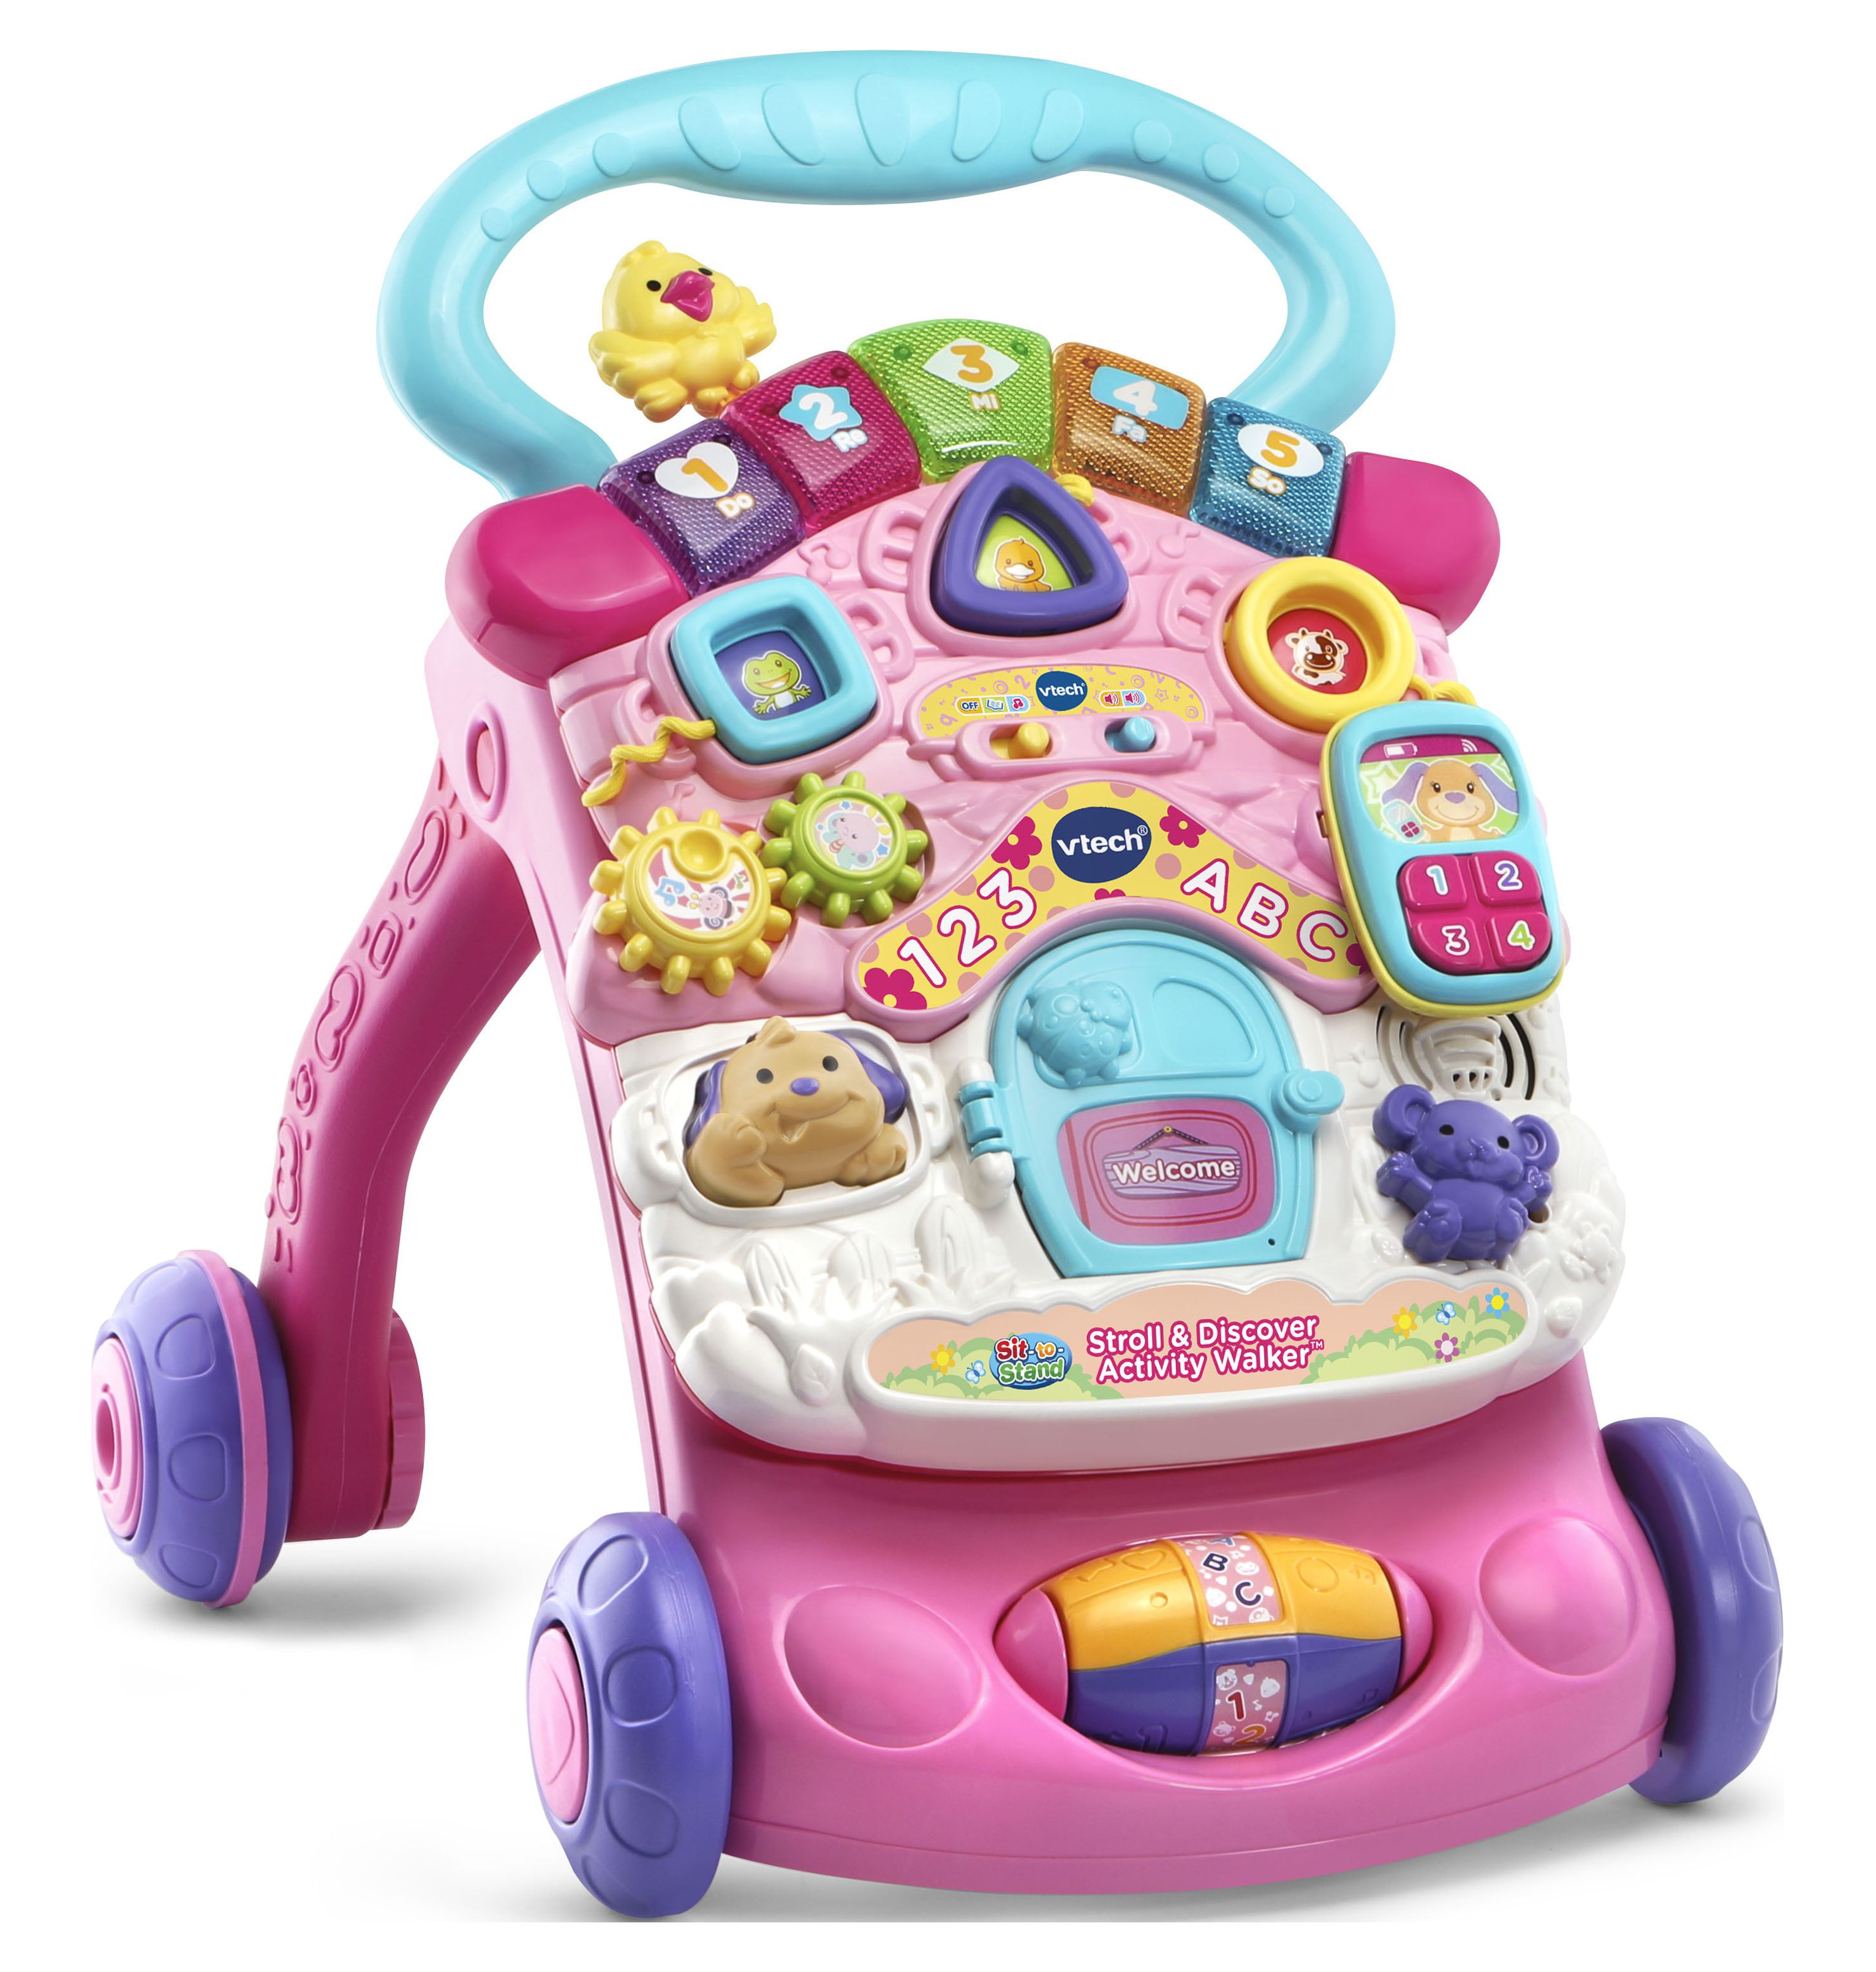 VTech® Stroll & Discover Activity Walker™ 2 -in-1 Pink Toddler Toy 9–36 months - image 3 of 5